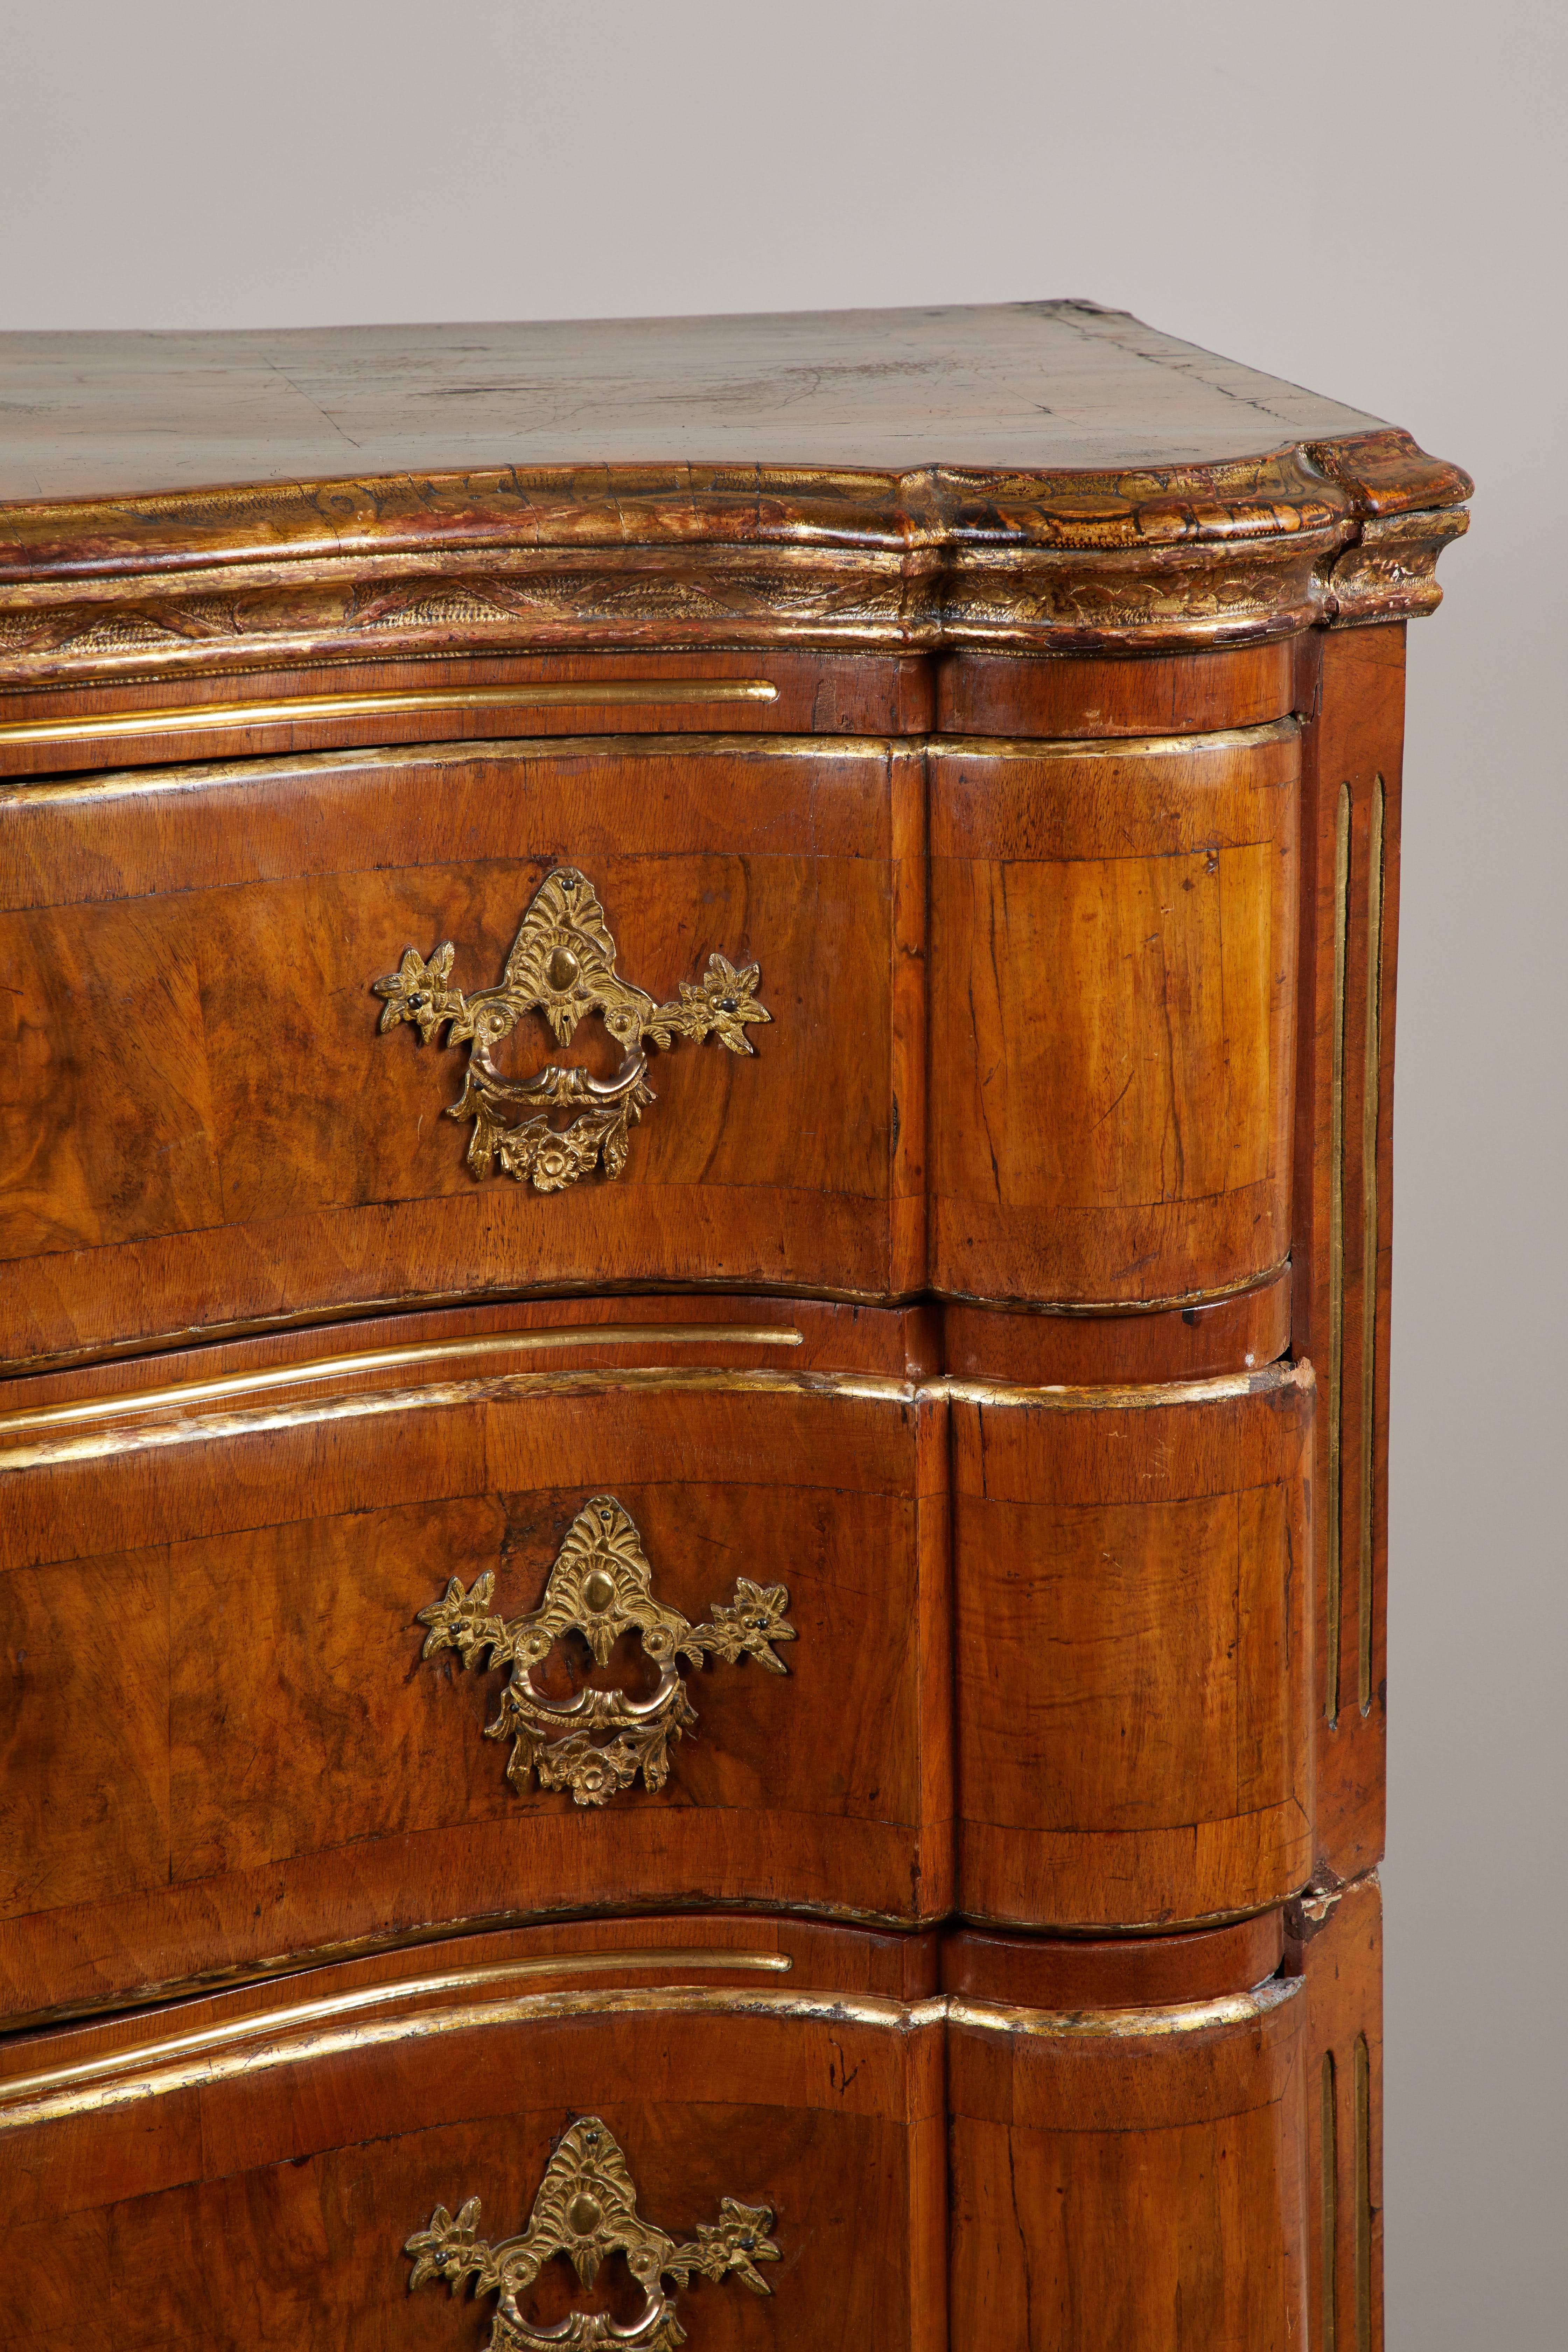 An extraordinary 18th century Danish Rococo walnut chest of drawers. Serpentine shaped front and sides featuring original handles and hardware, with crossbanded drawer fronts. Gilt edge detailing, and stands on carved, gilt legs. Splits in three